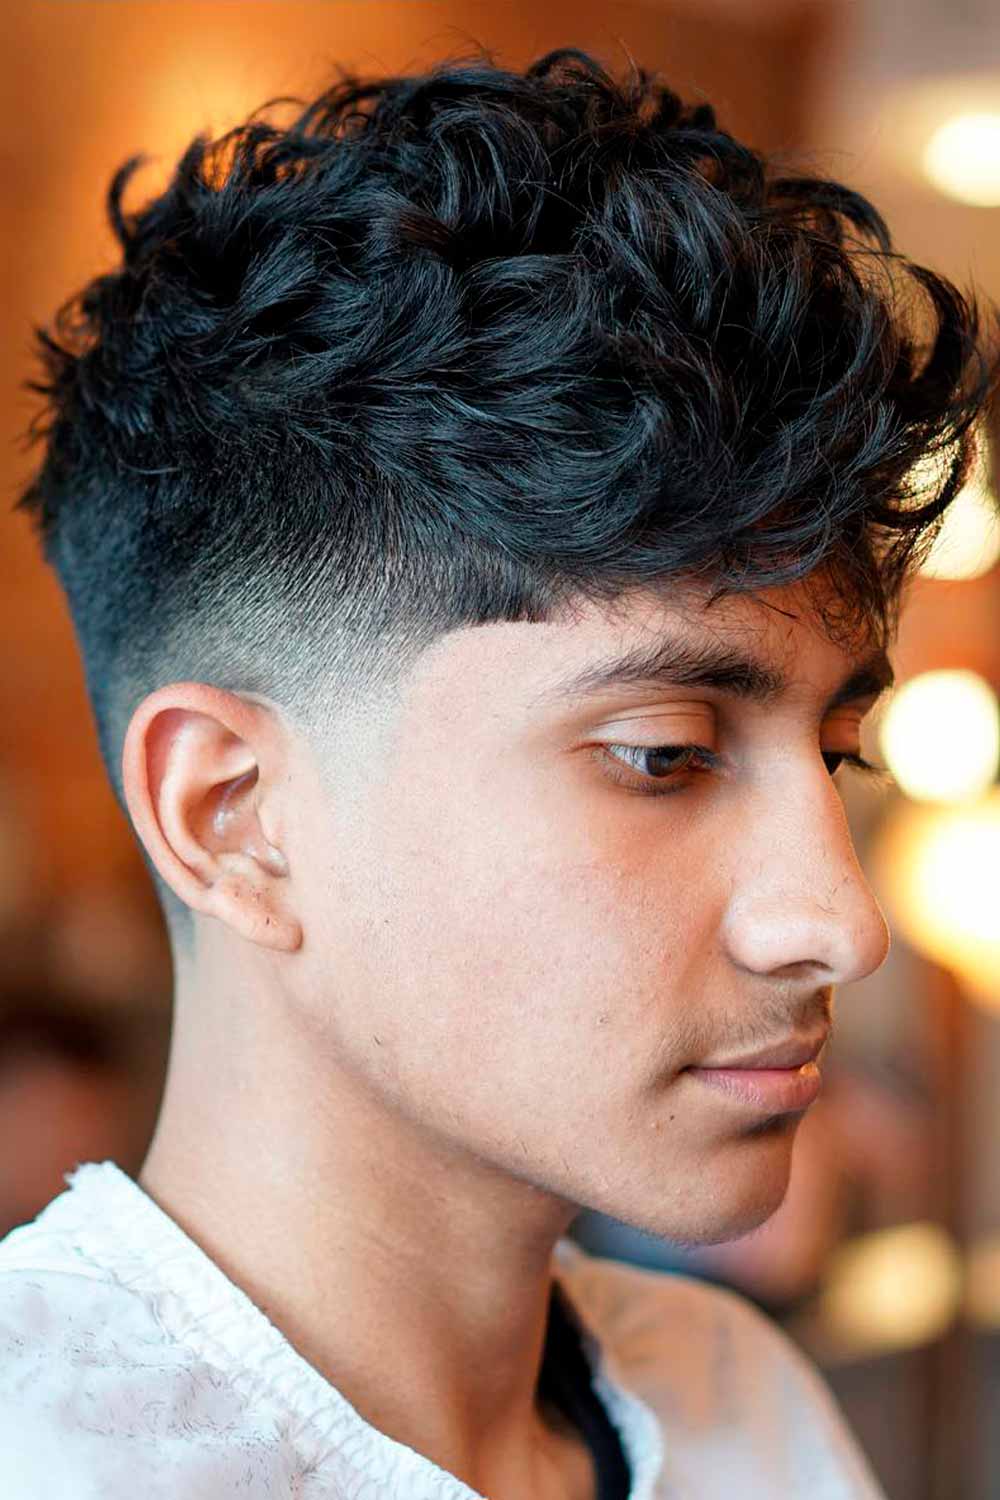 55+ Sexiest Short Curly Hairstyles For Men | MensHaircuts.com